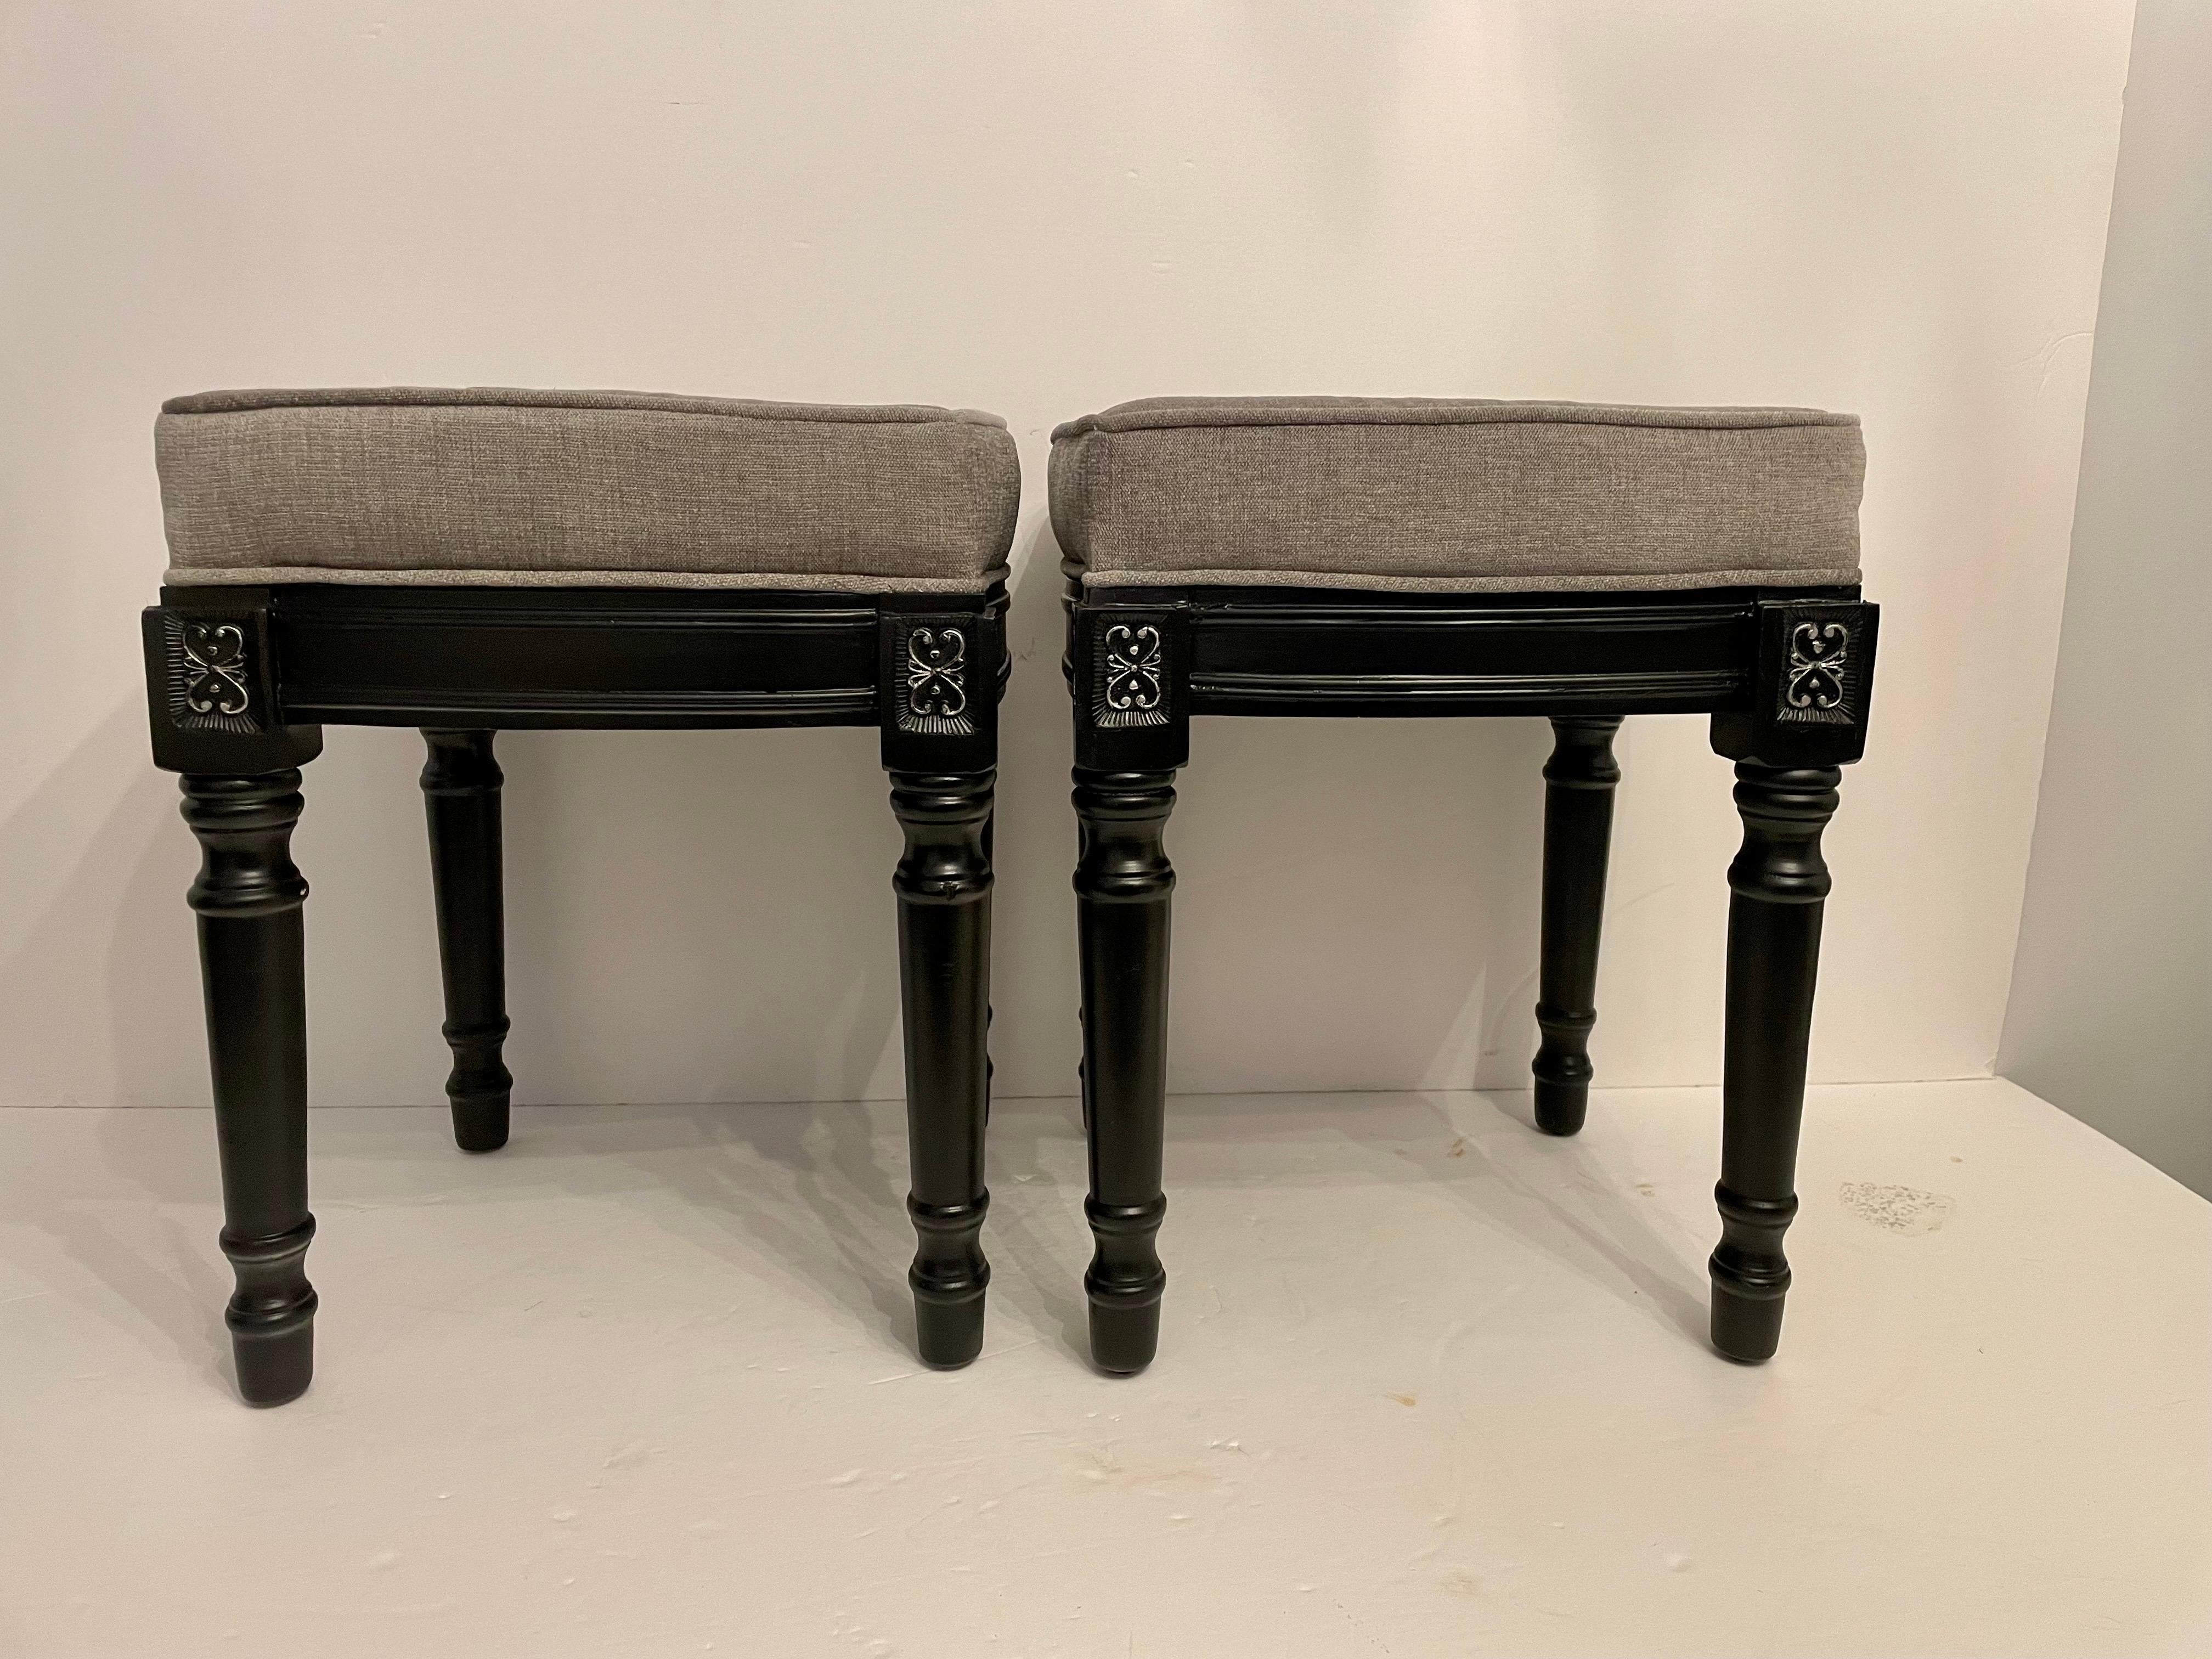 Pair of Black Painted and Silver Gilt Regency Style benches with newly upholstered seats in grey. Wear consistent with age and use.